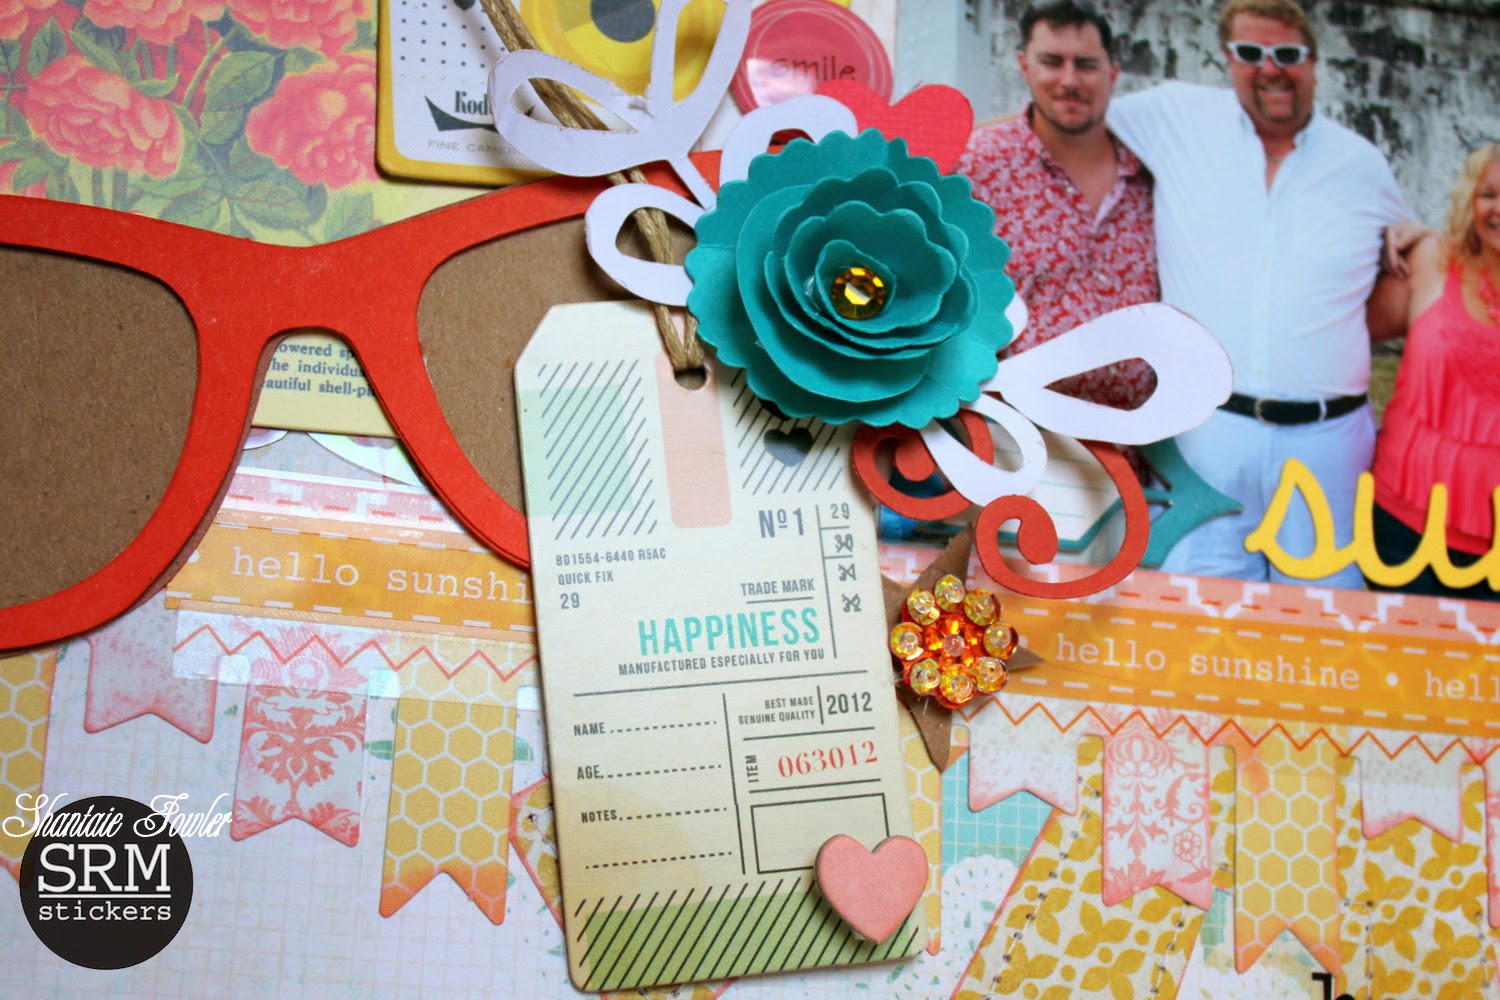 SRM Stickers Blog - Summer Layout by Shantaie - #layout #stickers #summer 